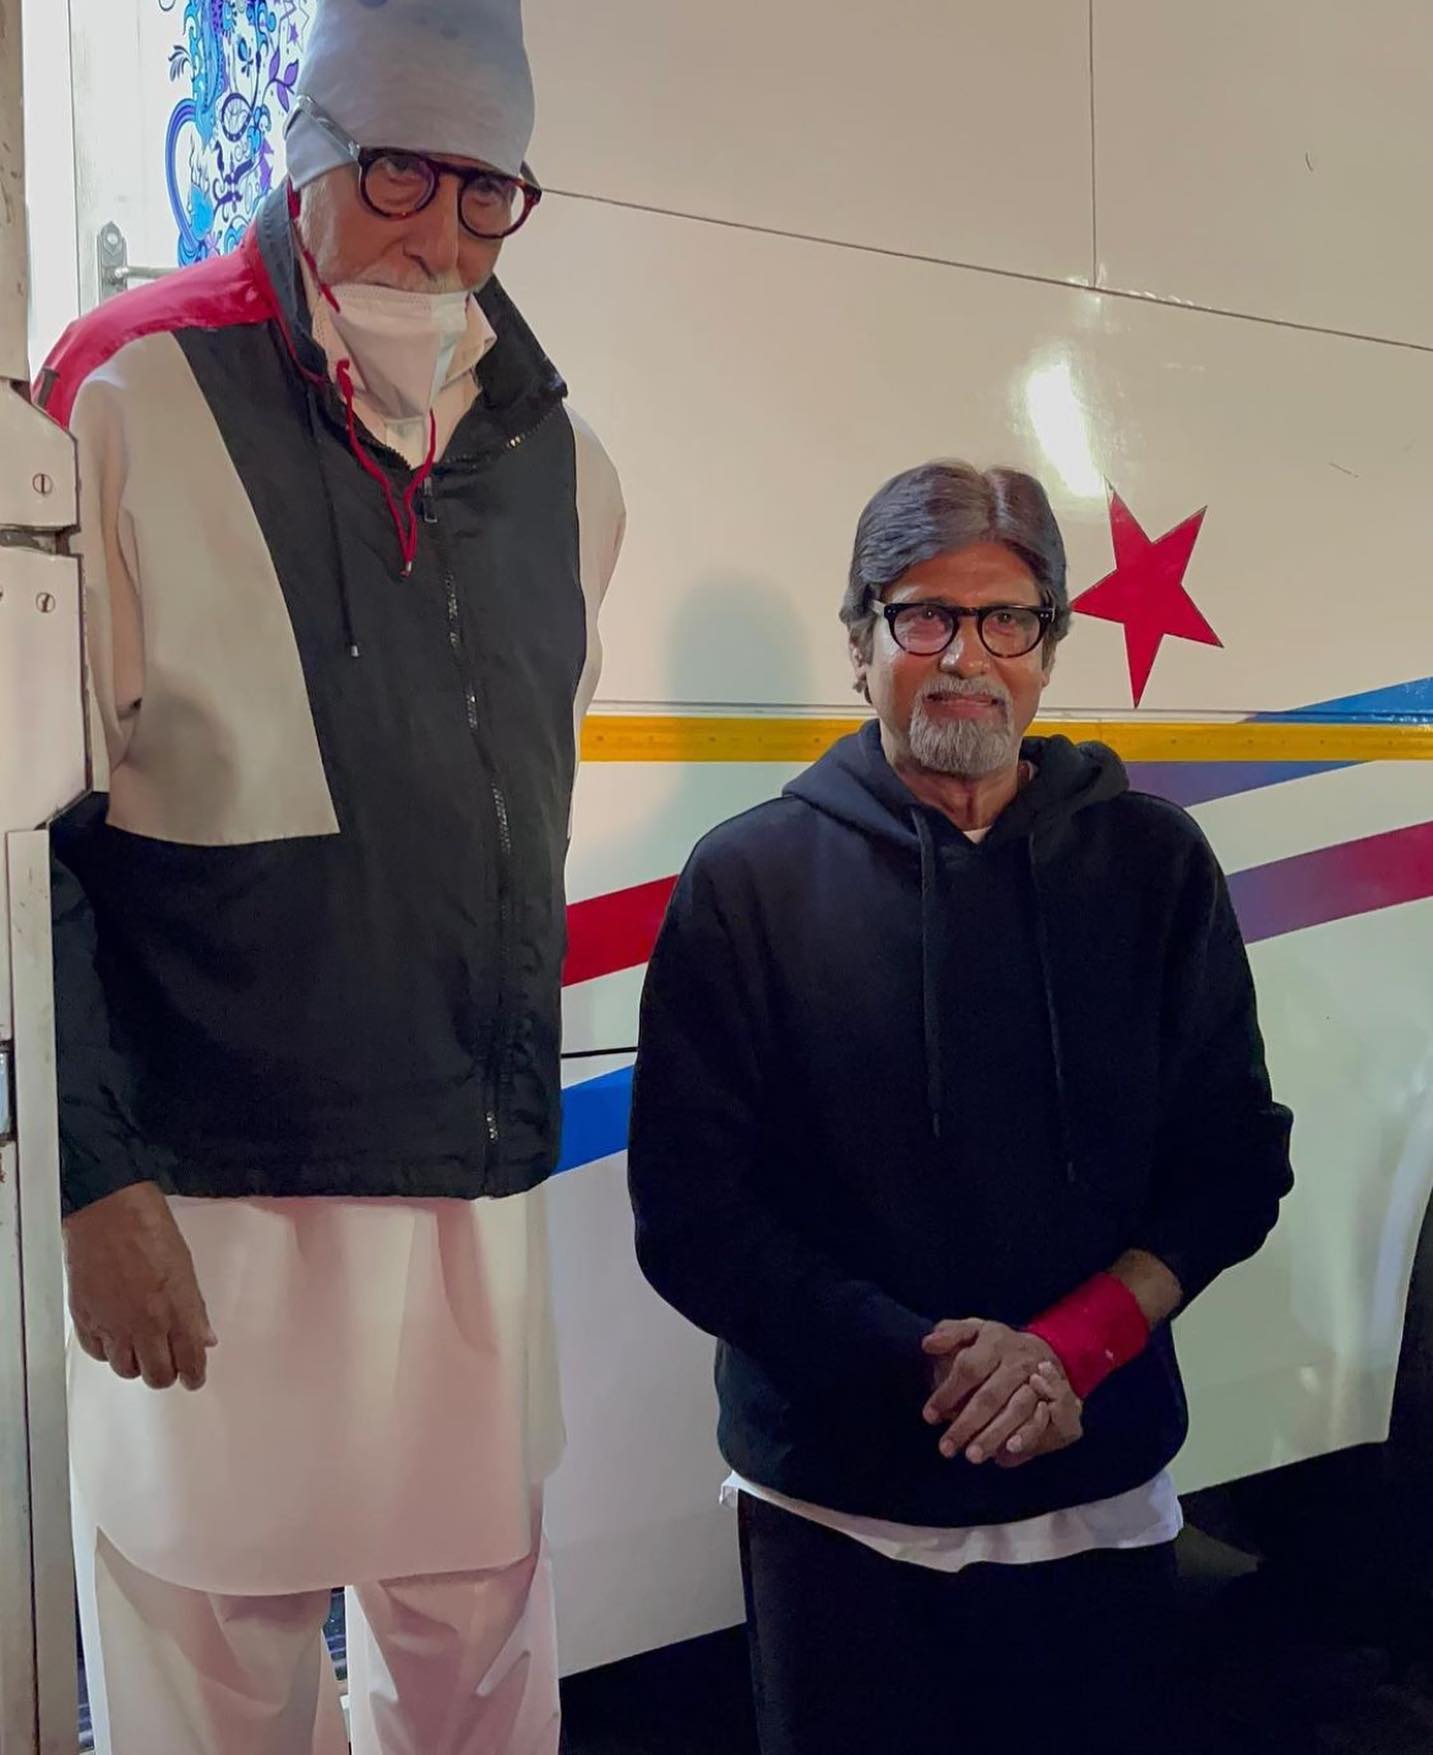 Bollywood's top star Amitabh Bachchan, right, poses next to a waxwork  figure of himself at the 10th International Indian Film Academy in Macau  Thursday, June 11, 2009. Bollywood's top stars gathered in the coastal  gambling enclave Macau on Thursday for ...